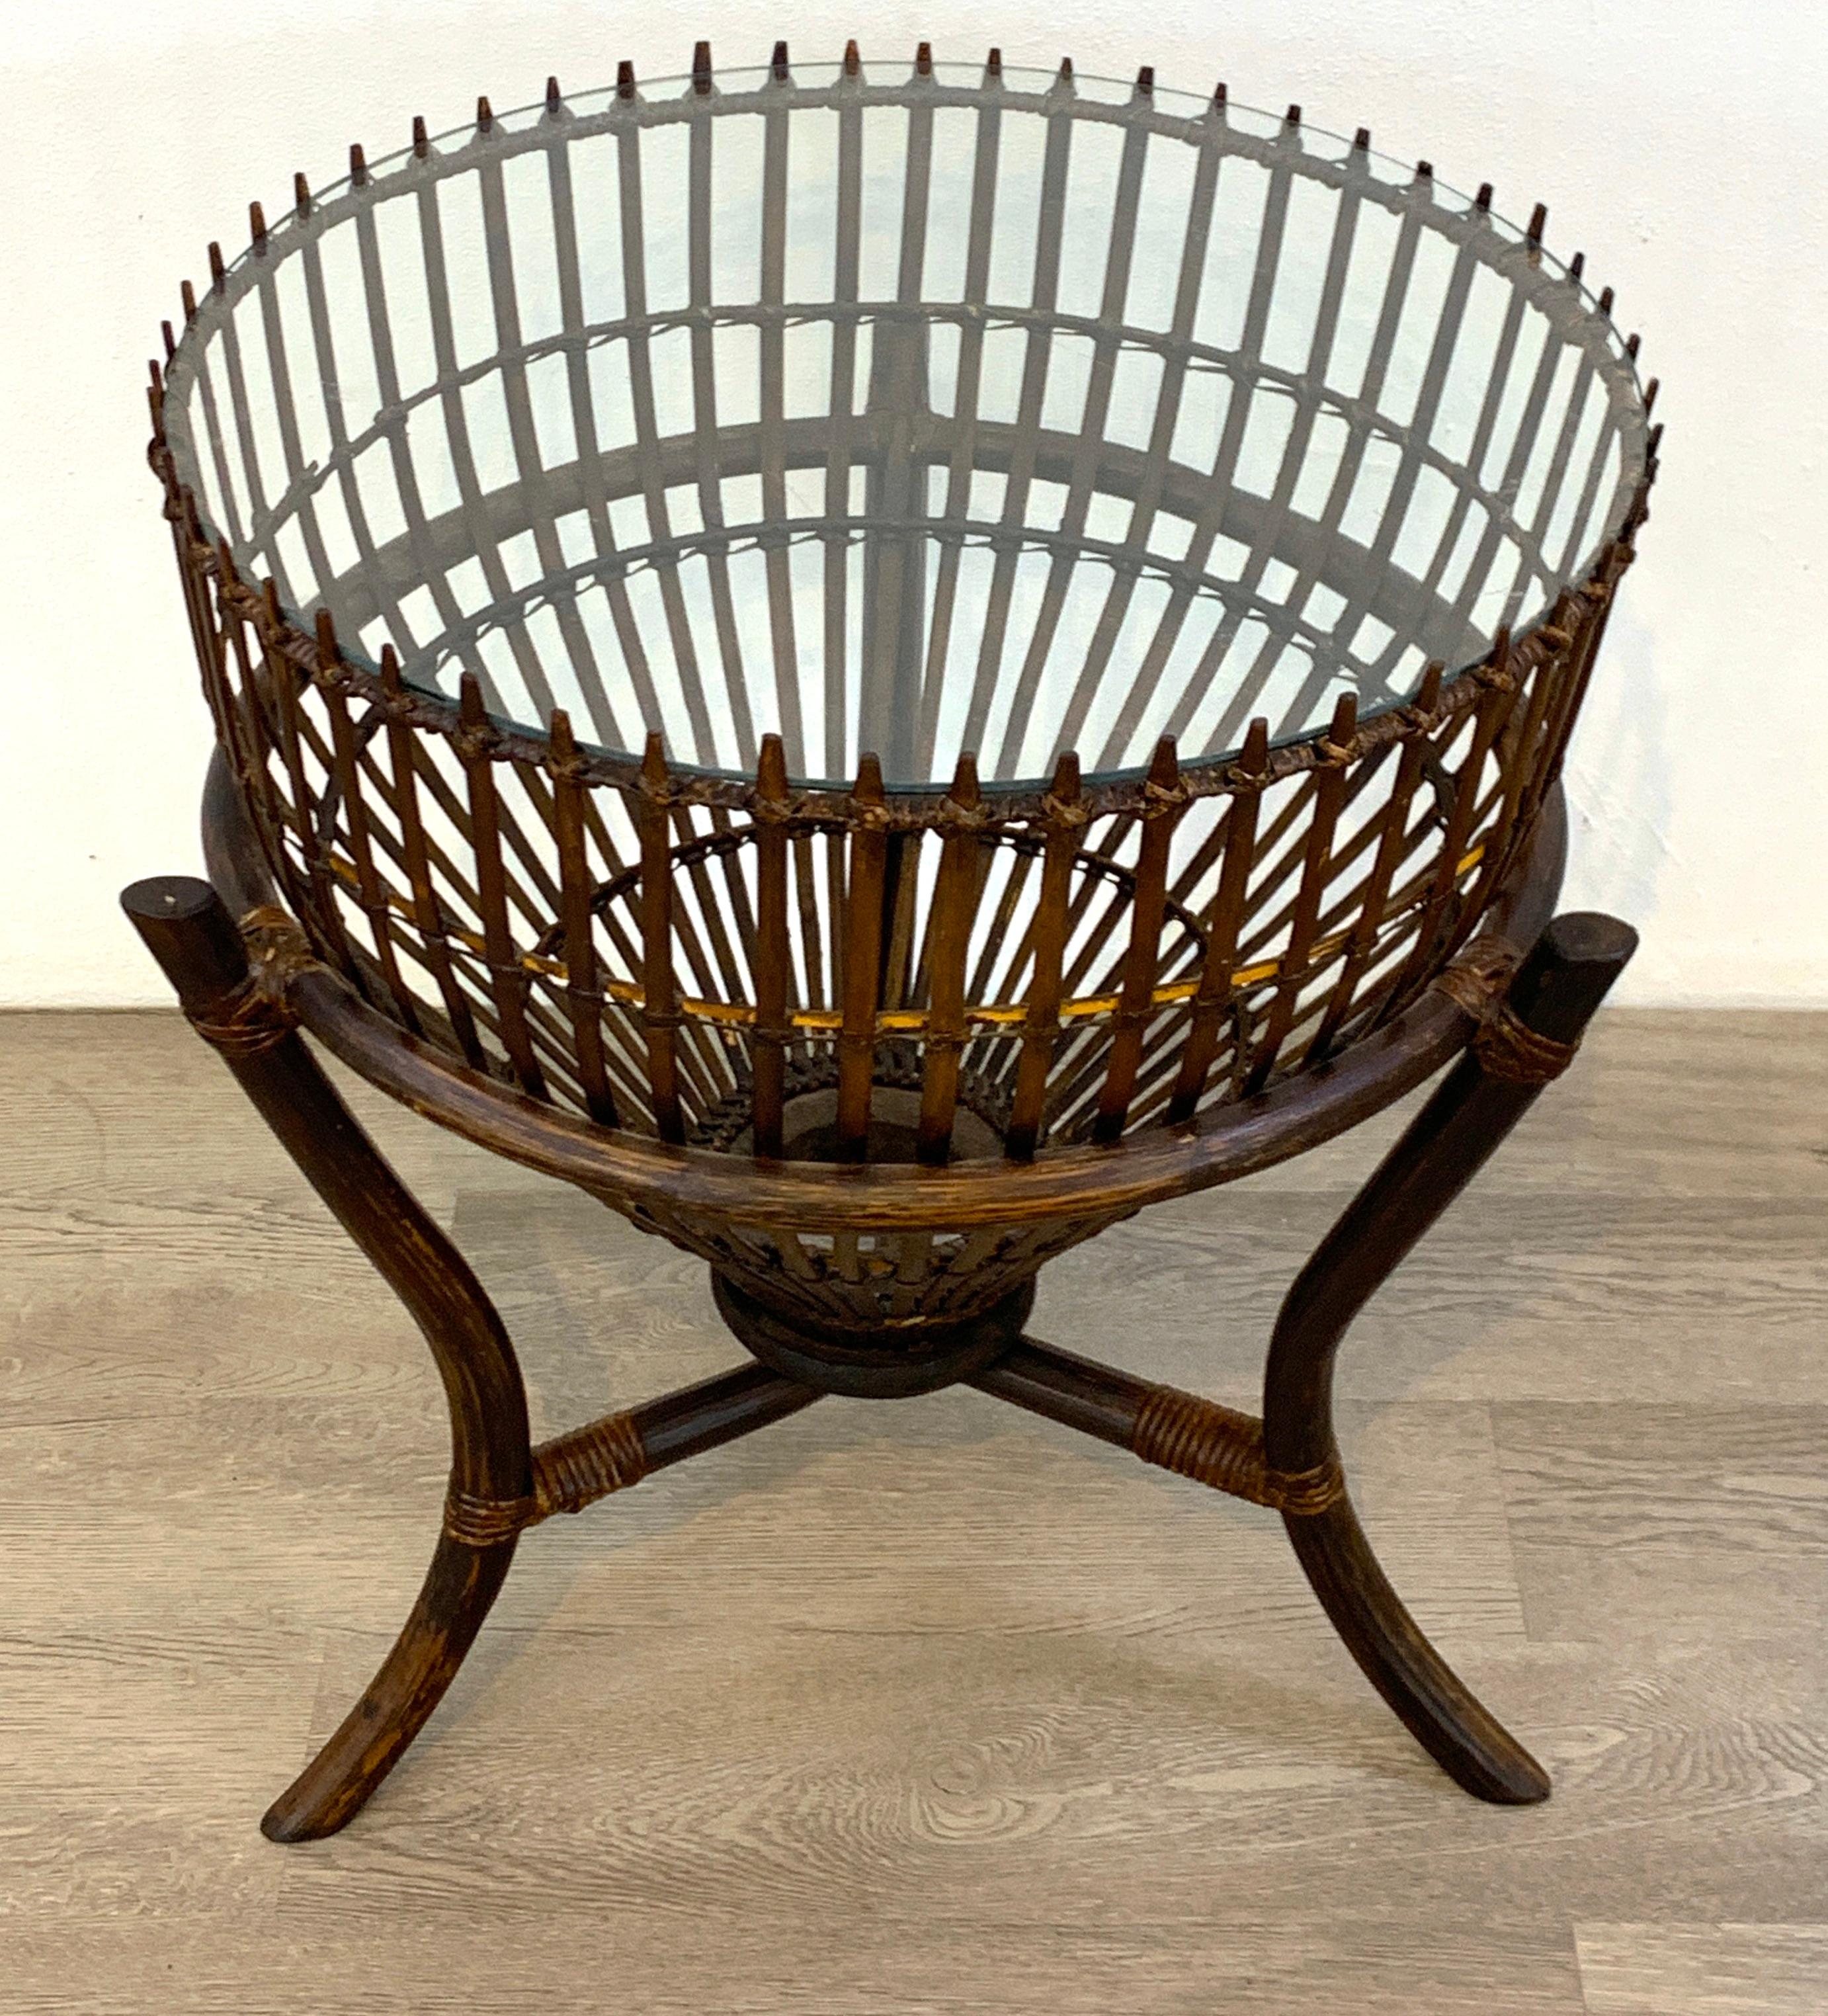 Franco Albini style fish trap rattan and glass side table, restored
With removable 19.75 